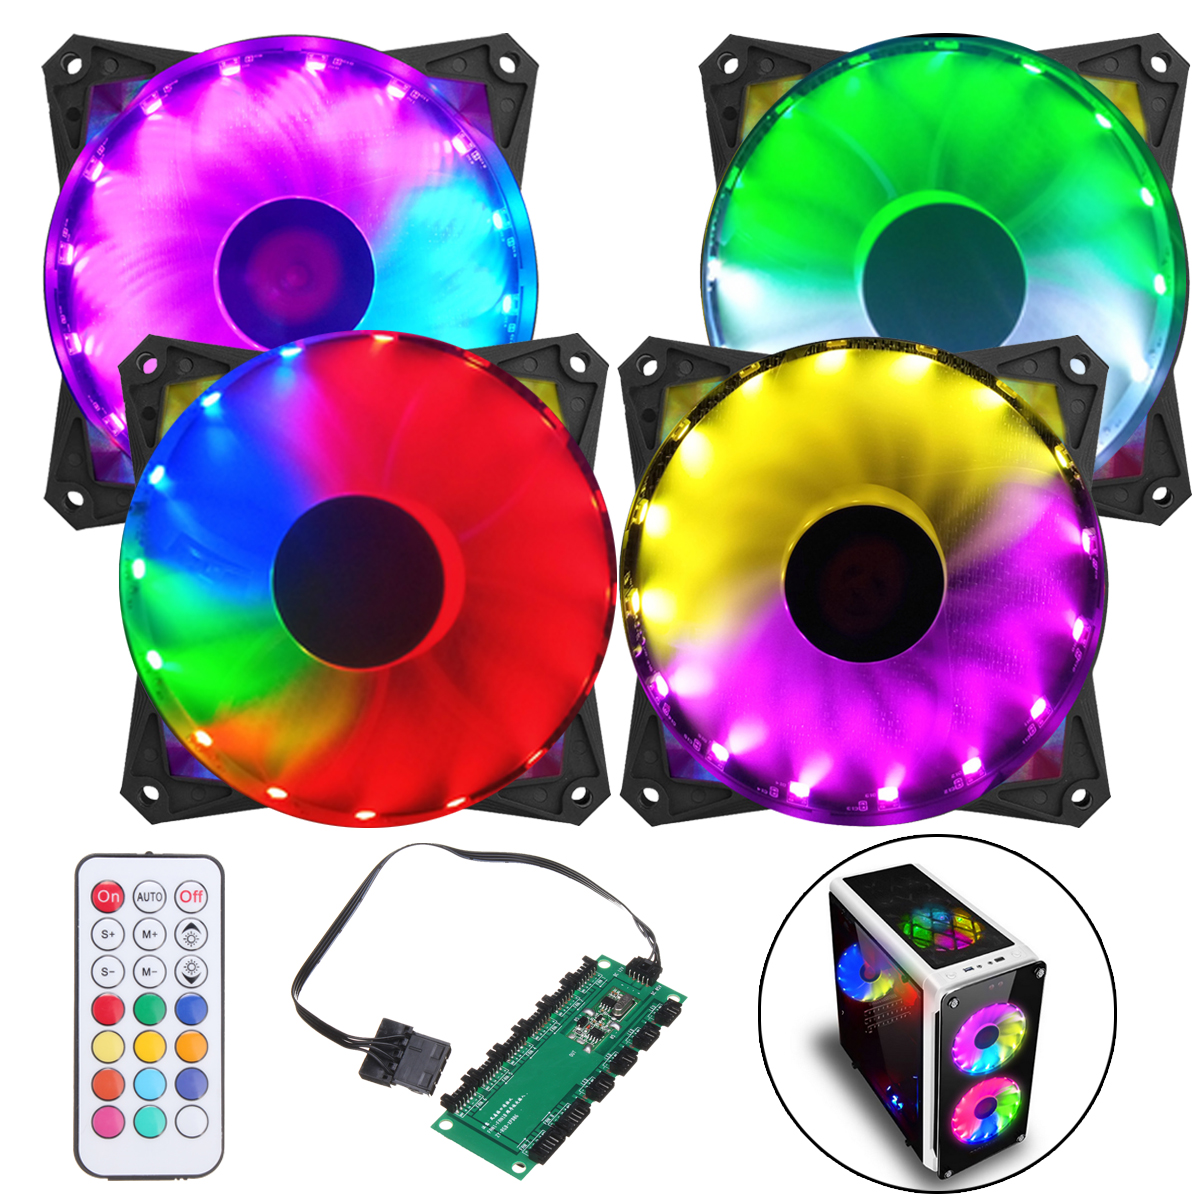 

Coolmoon 4PCS 120mm Adjustable RGB Led Light PC Case Cooling Fan with Remote Control